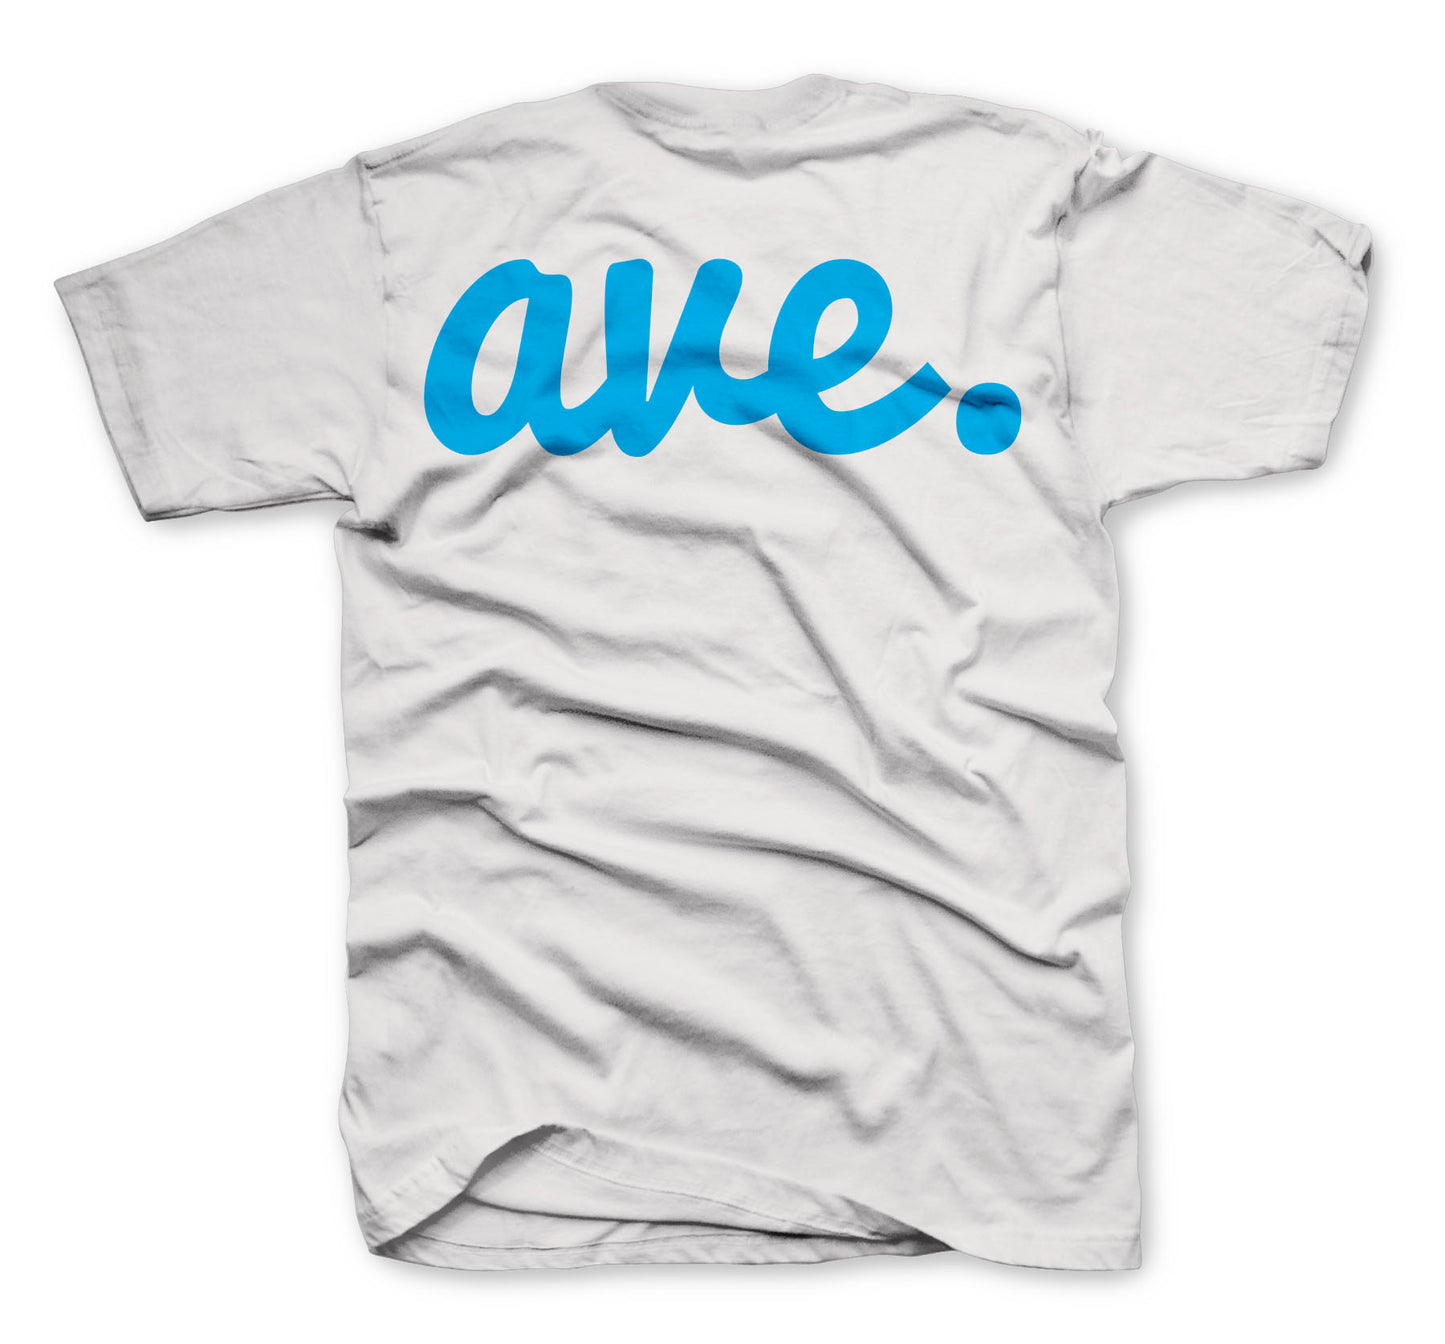 AVE FLIPSIDE LOGO TEE (WHITE/CONTACT BLUE)